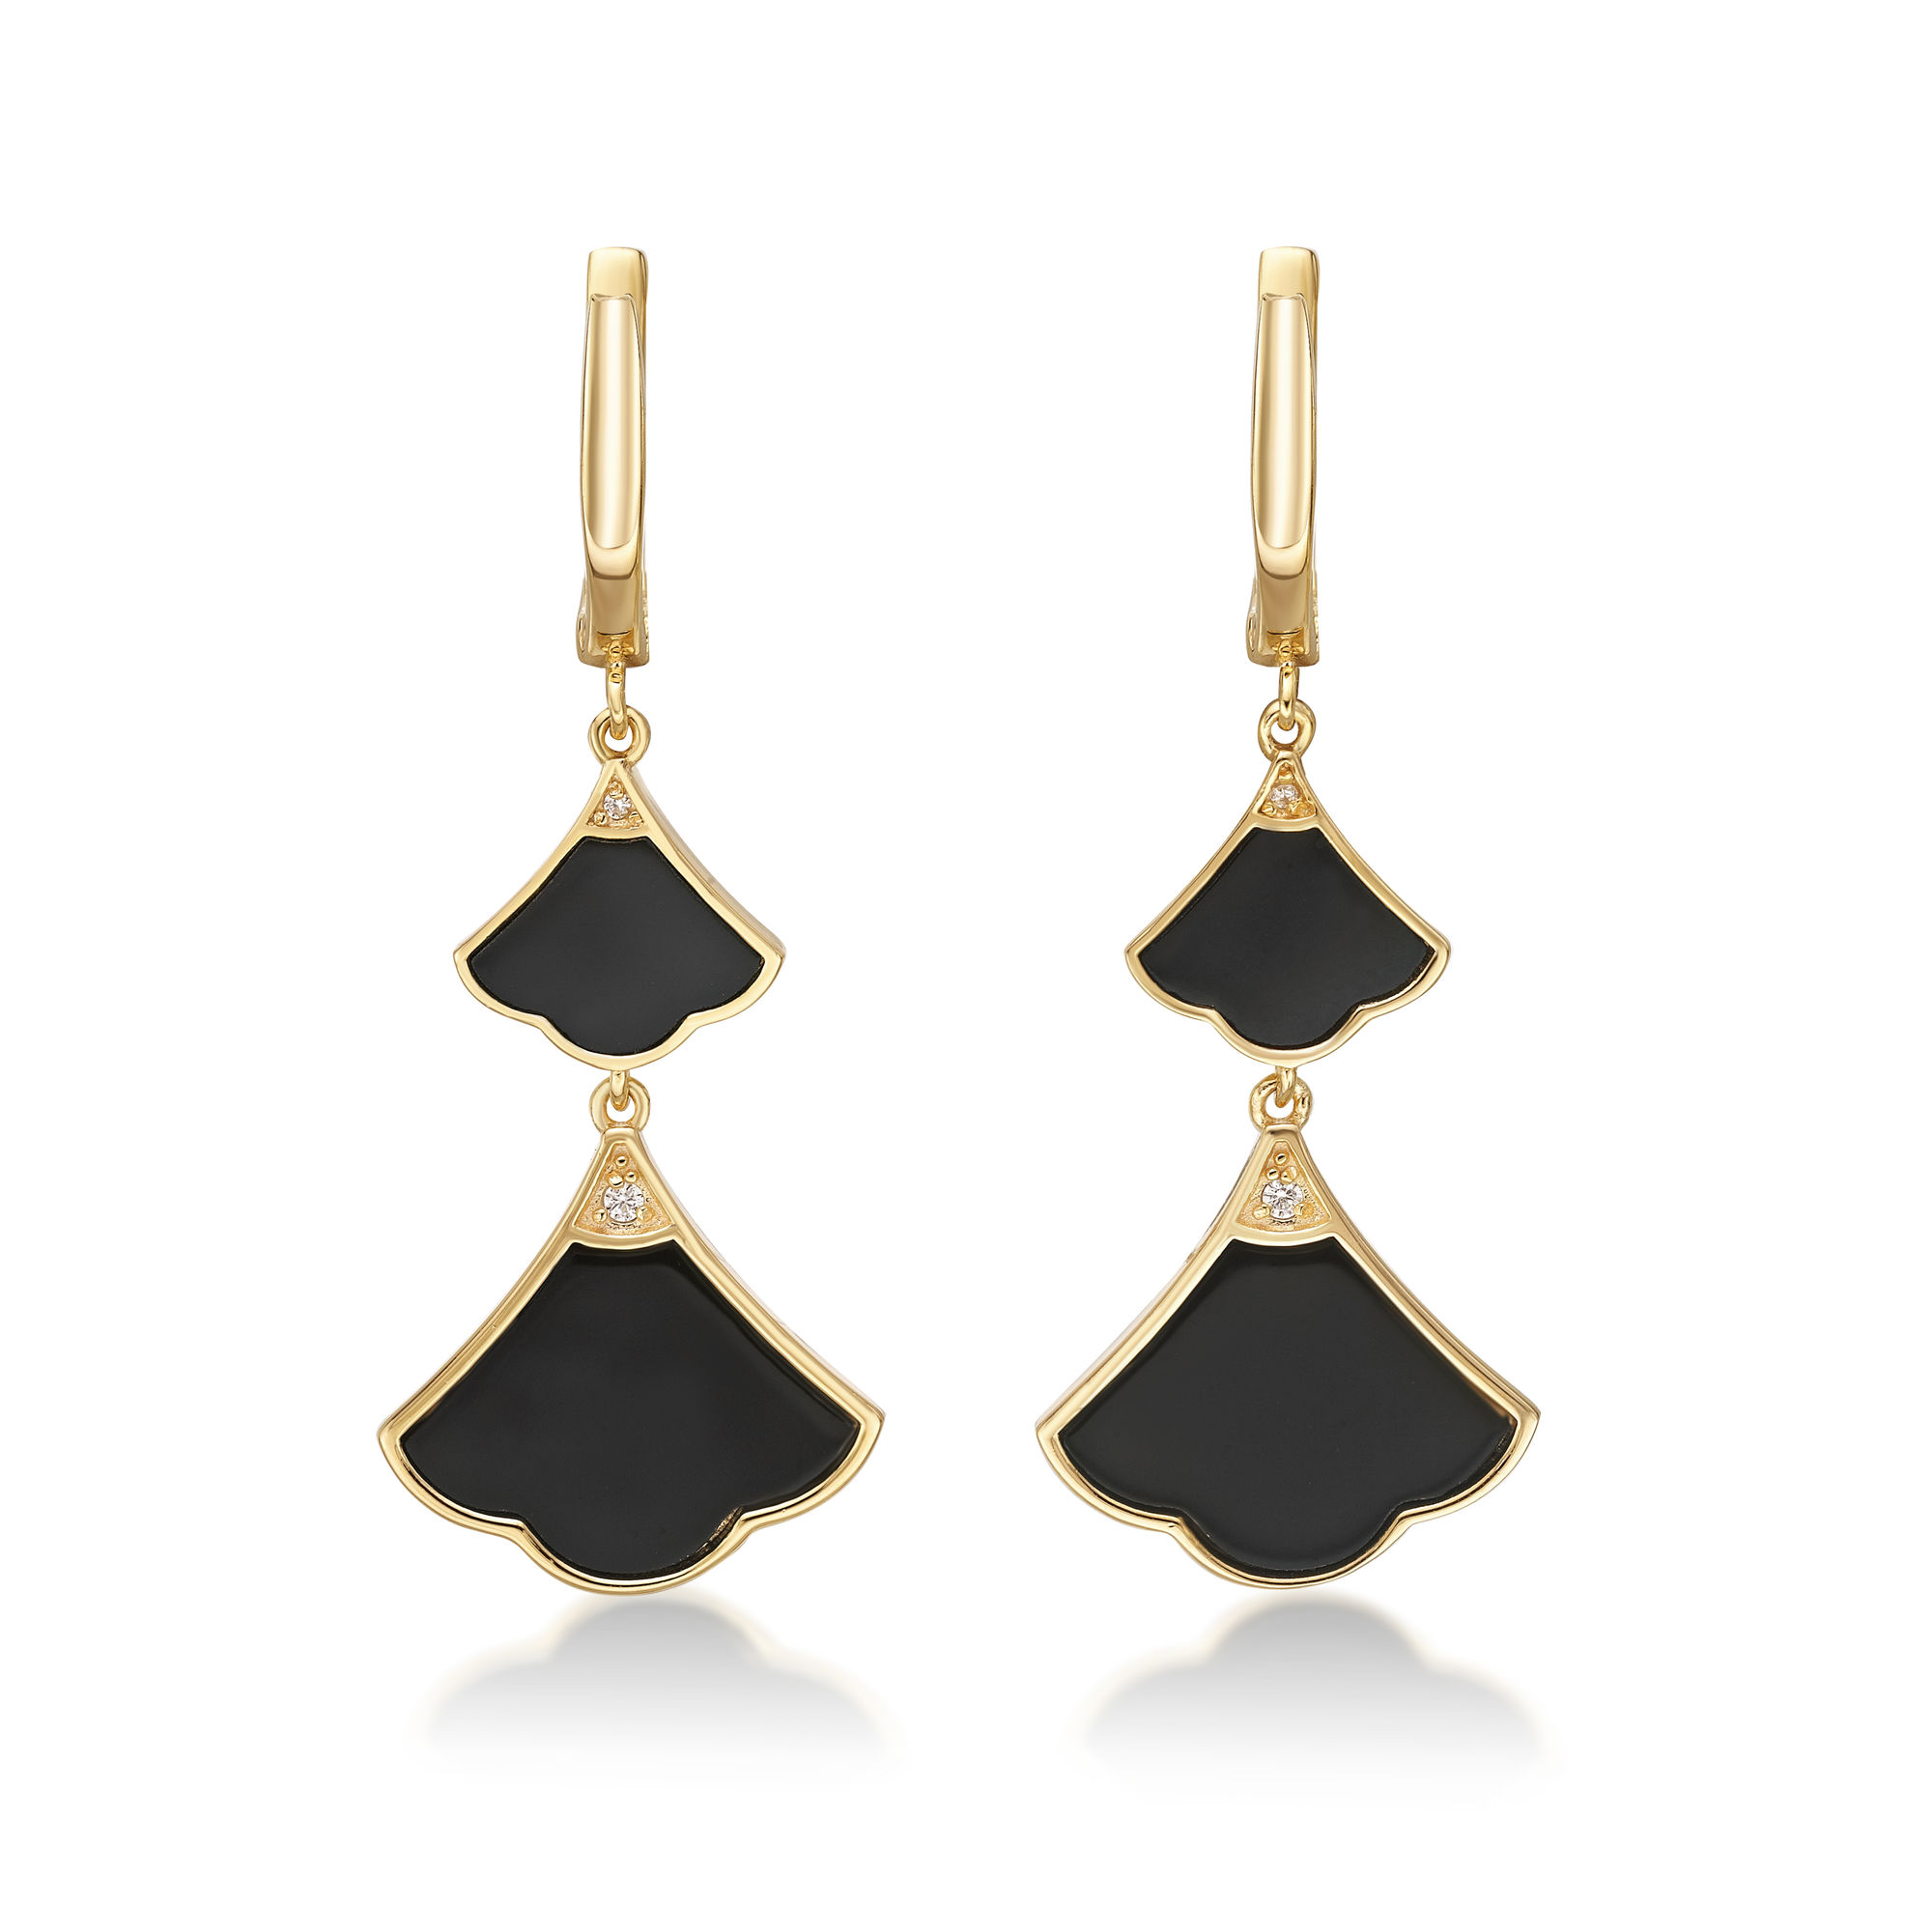 Lavari Jewelers Women's Black Onyx Double Fan Dangle Drop Earrings with Yellow Gold Plating and Hinged Post, 925 Sterling Silver